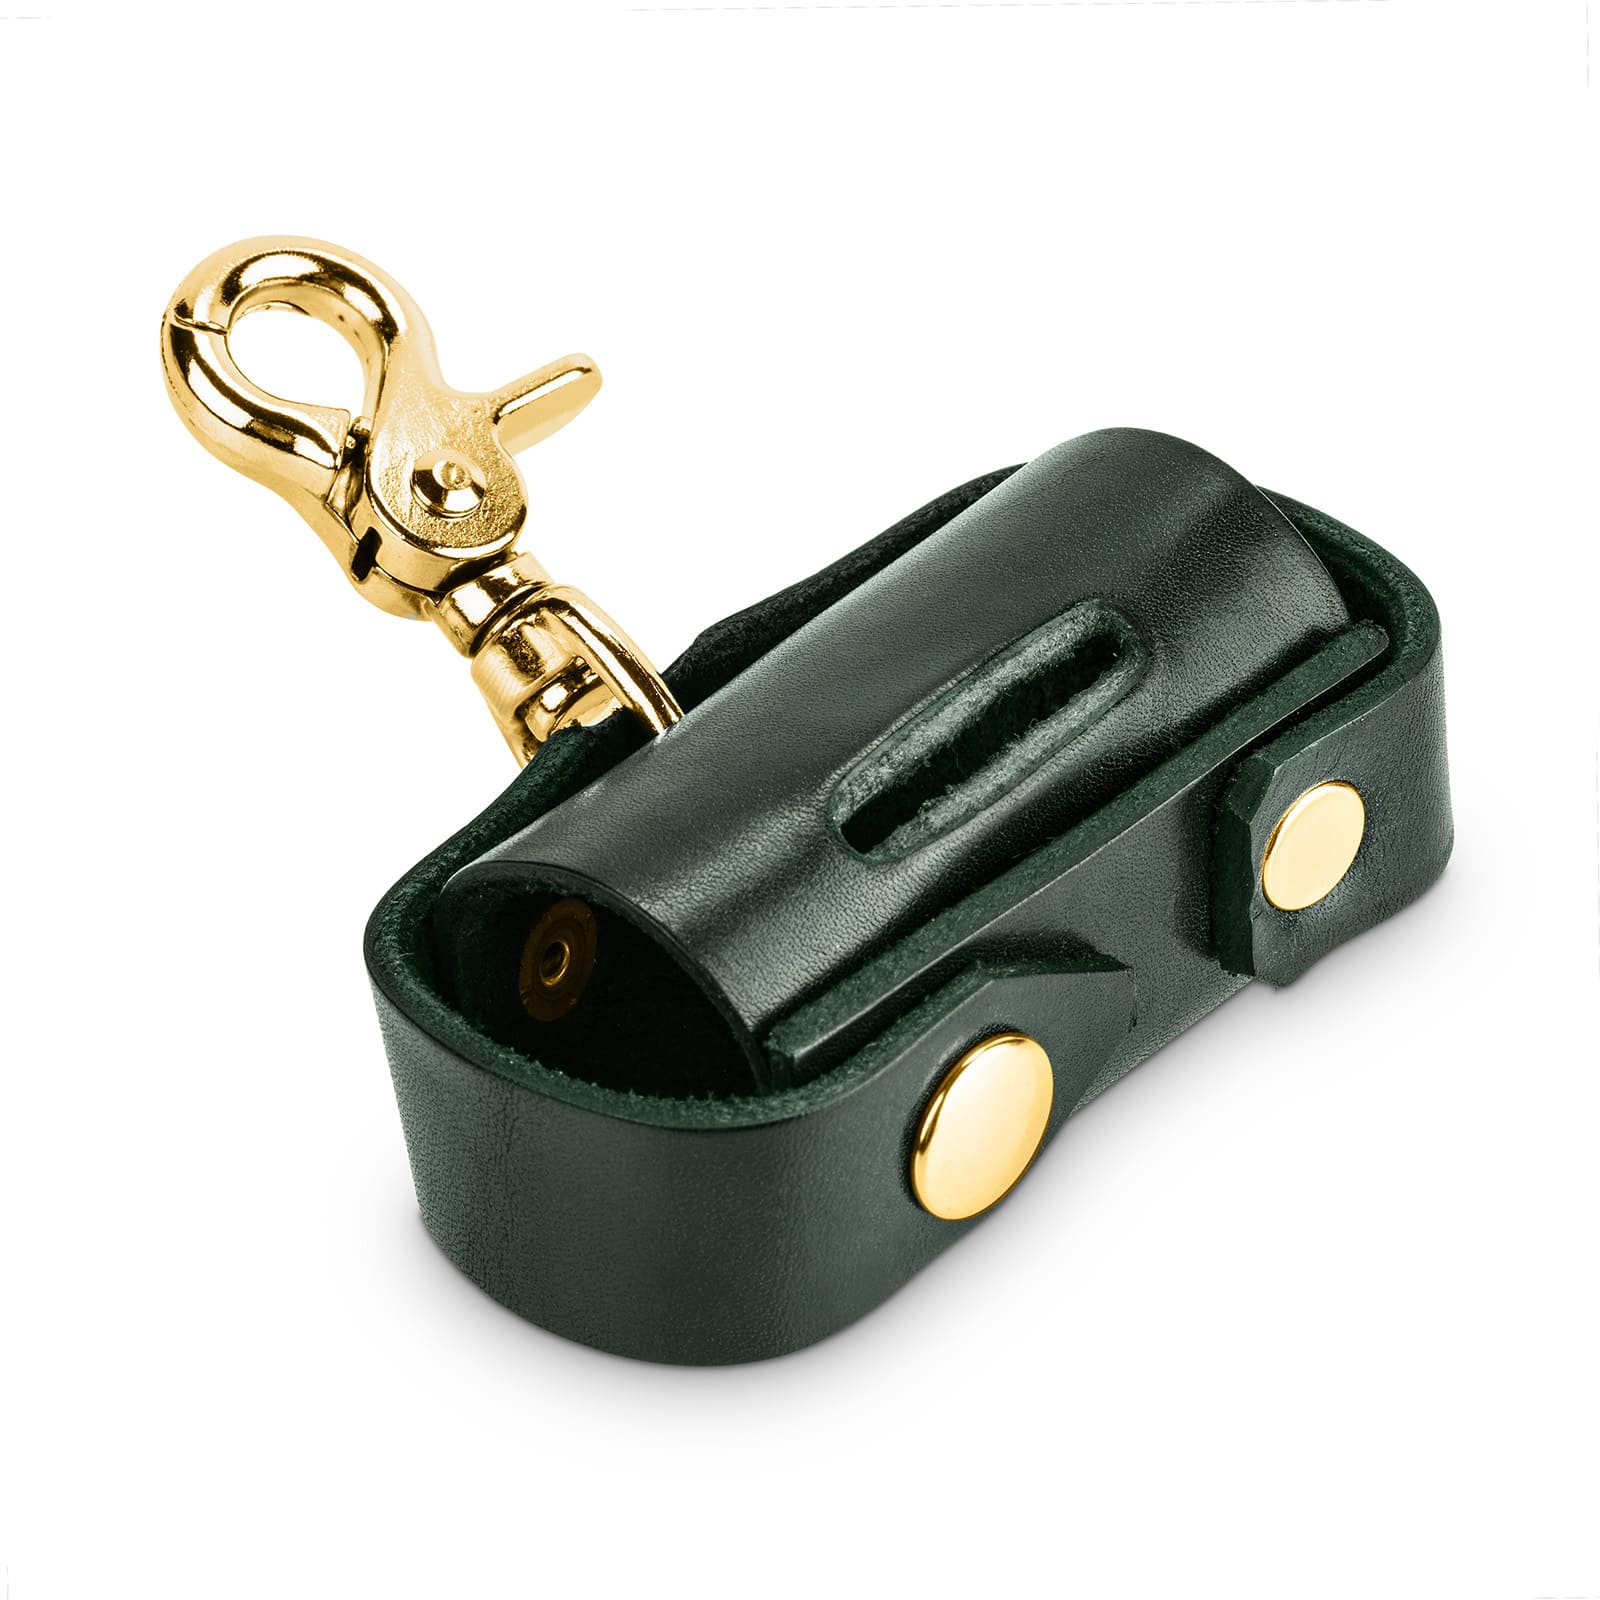 Green leather, brass carabiner